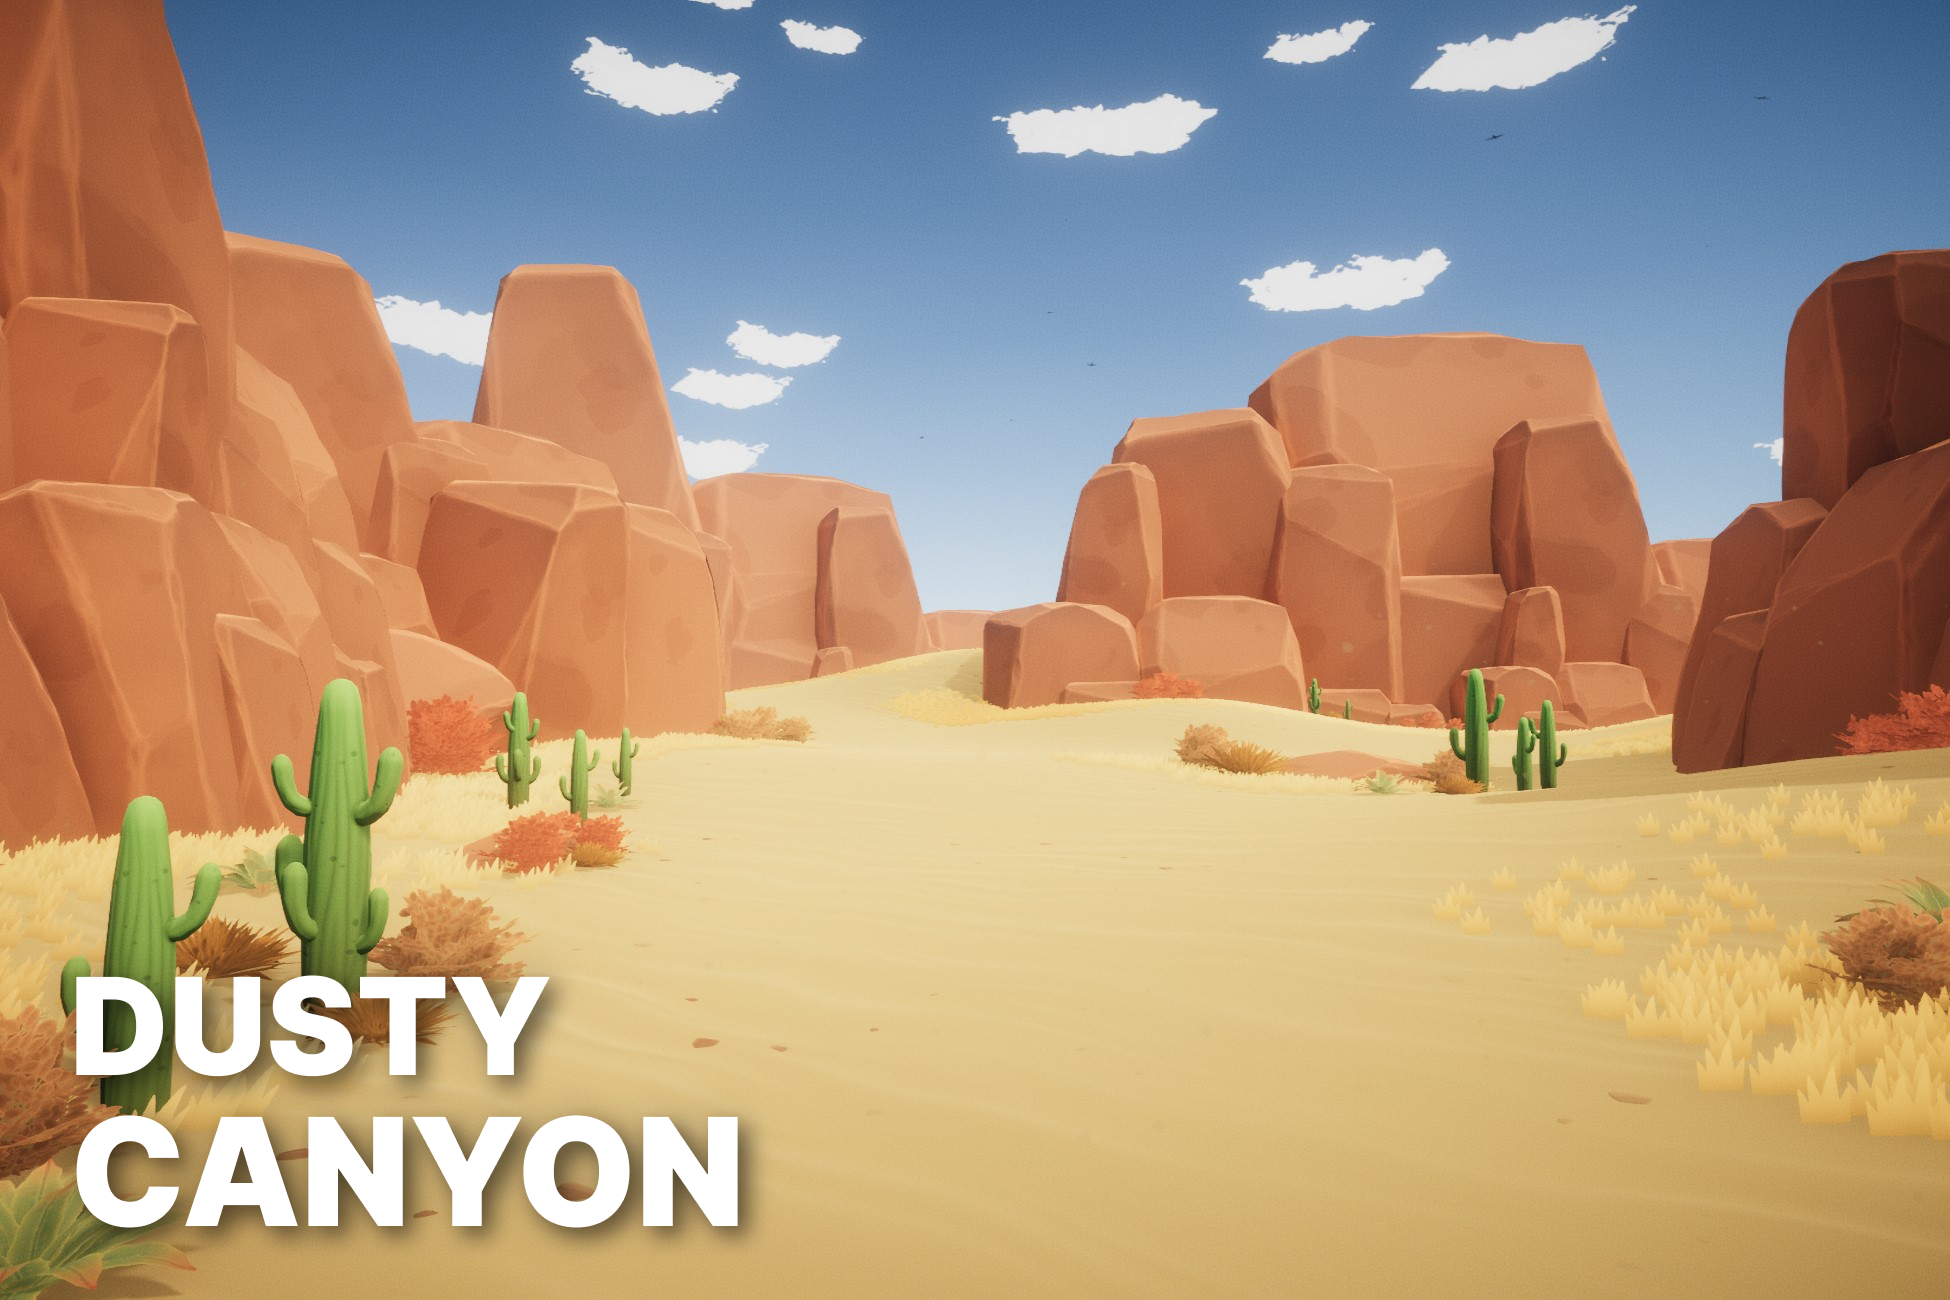 Dusty Canyon - Stylized Game Environment